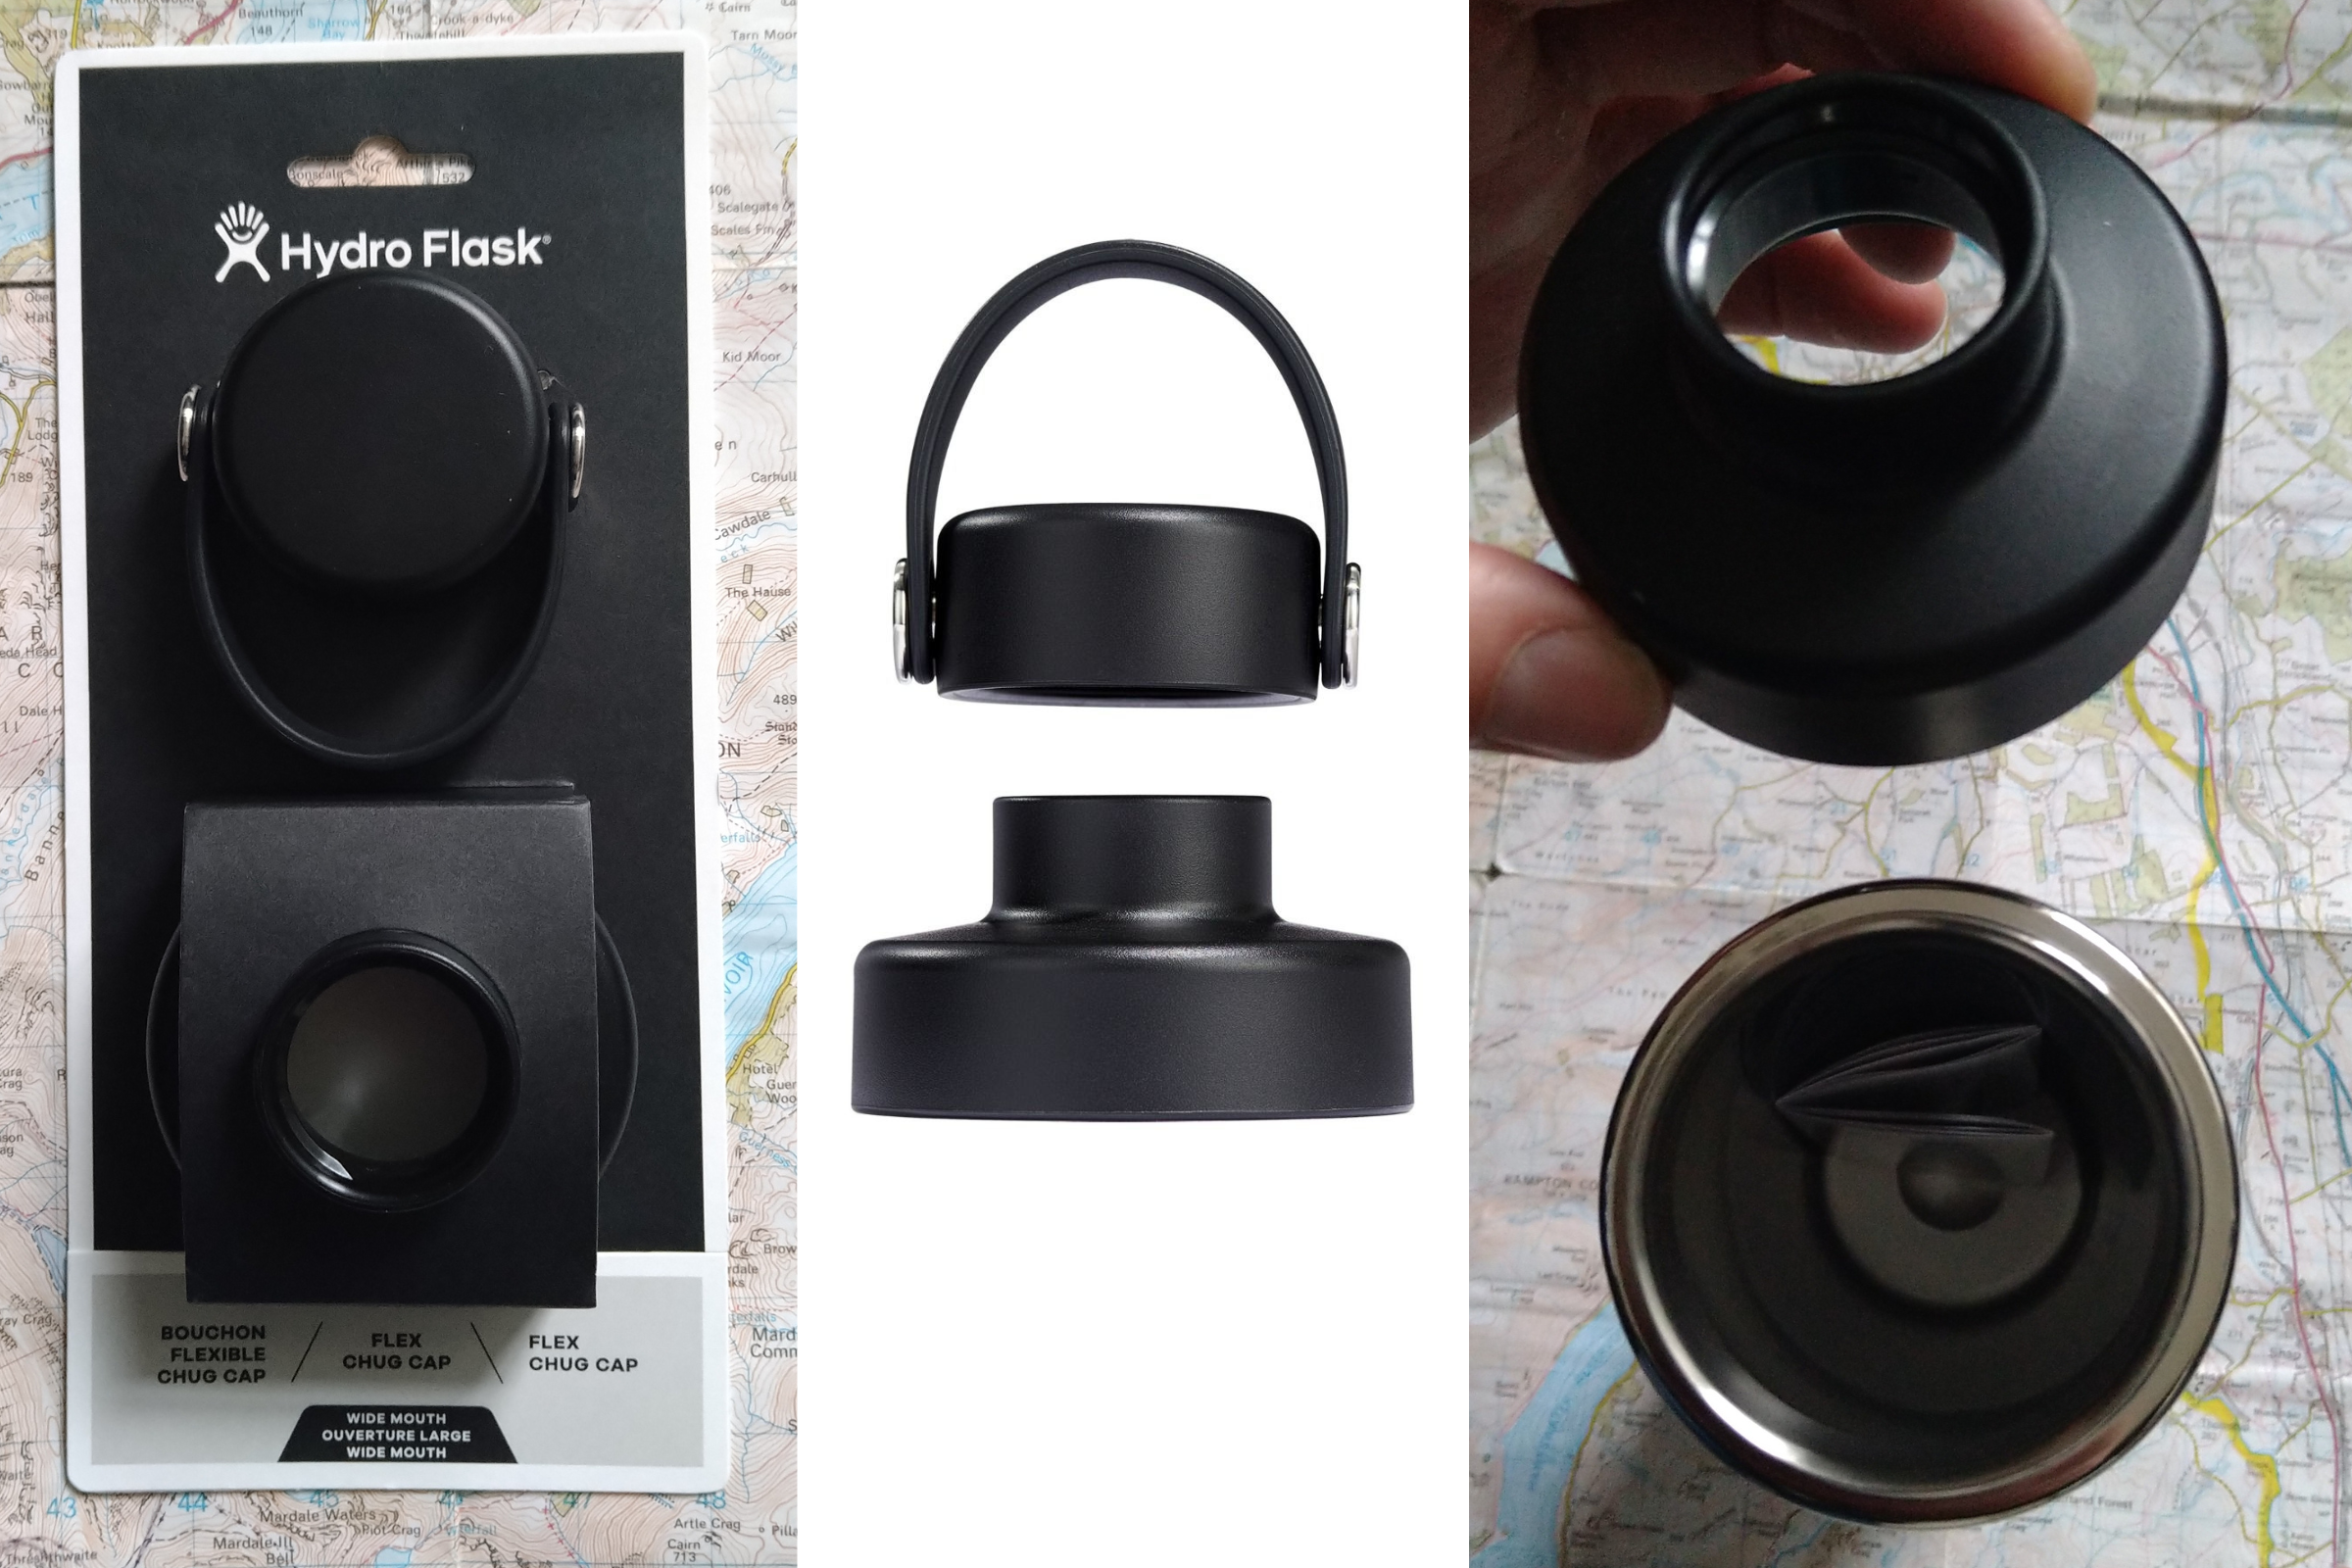 You can now buy a Chug Cap that fits existing Hydro Flask bottles